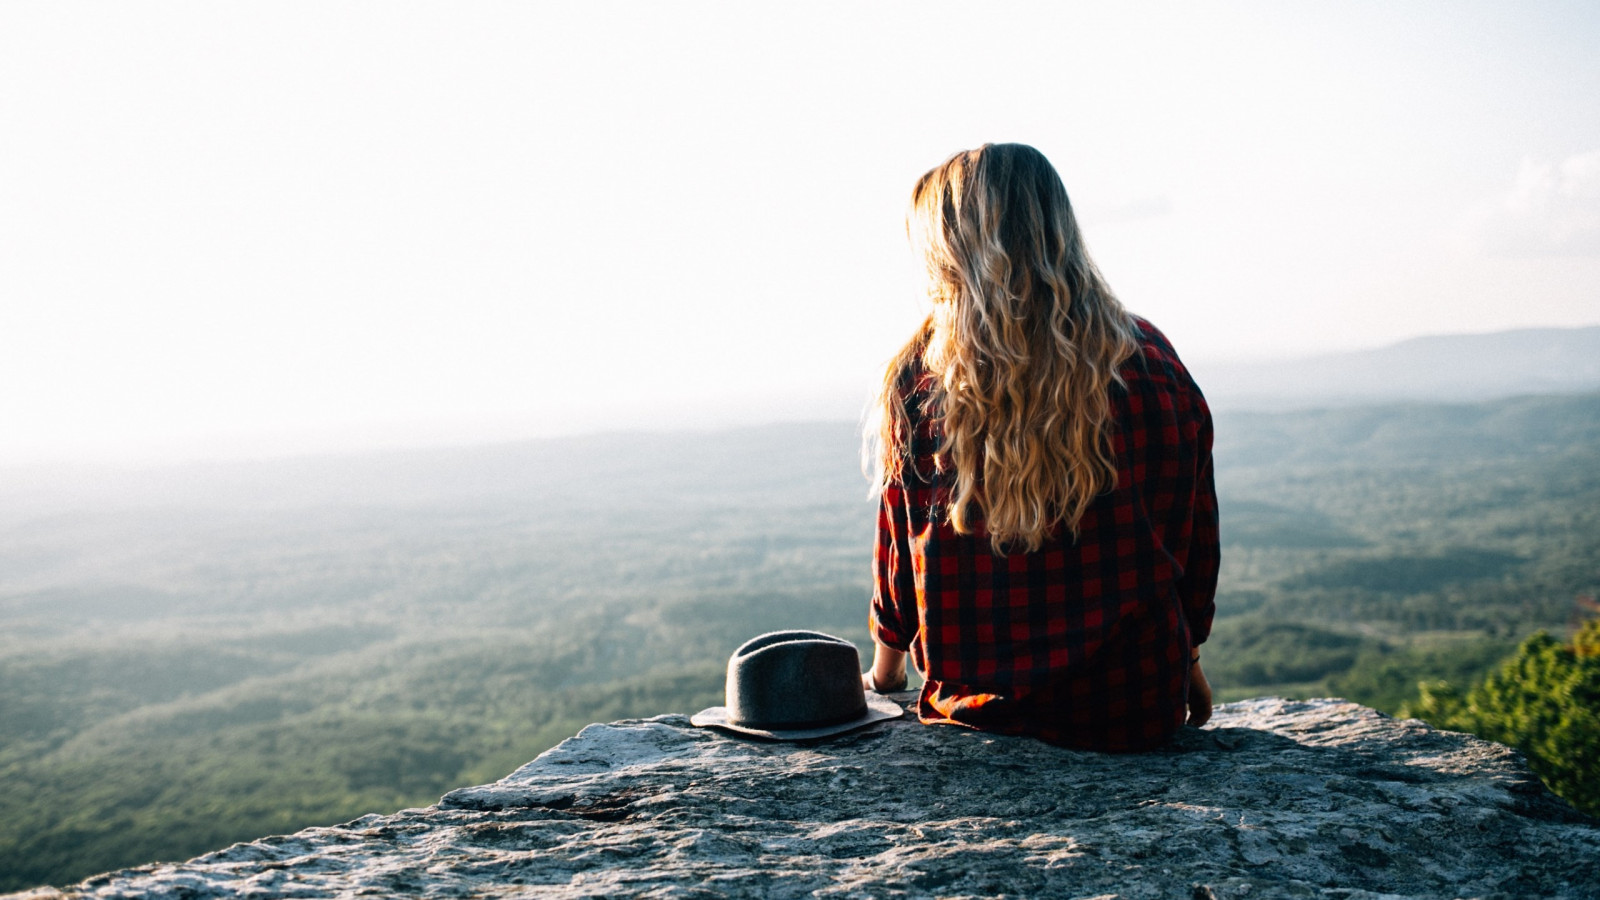 Lady admiring the natural view from Cheaha Mountains, USA wallpaper 1600x900